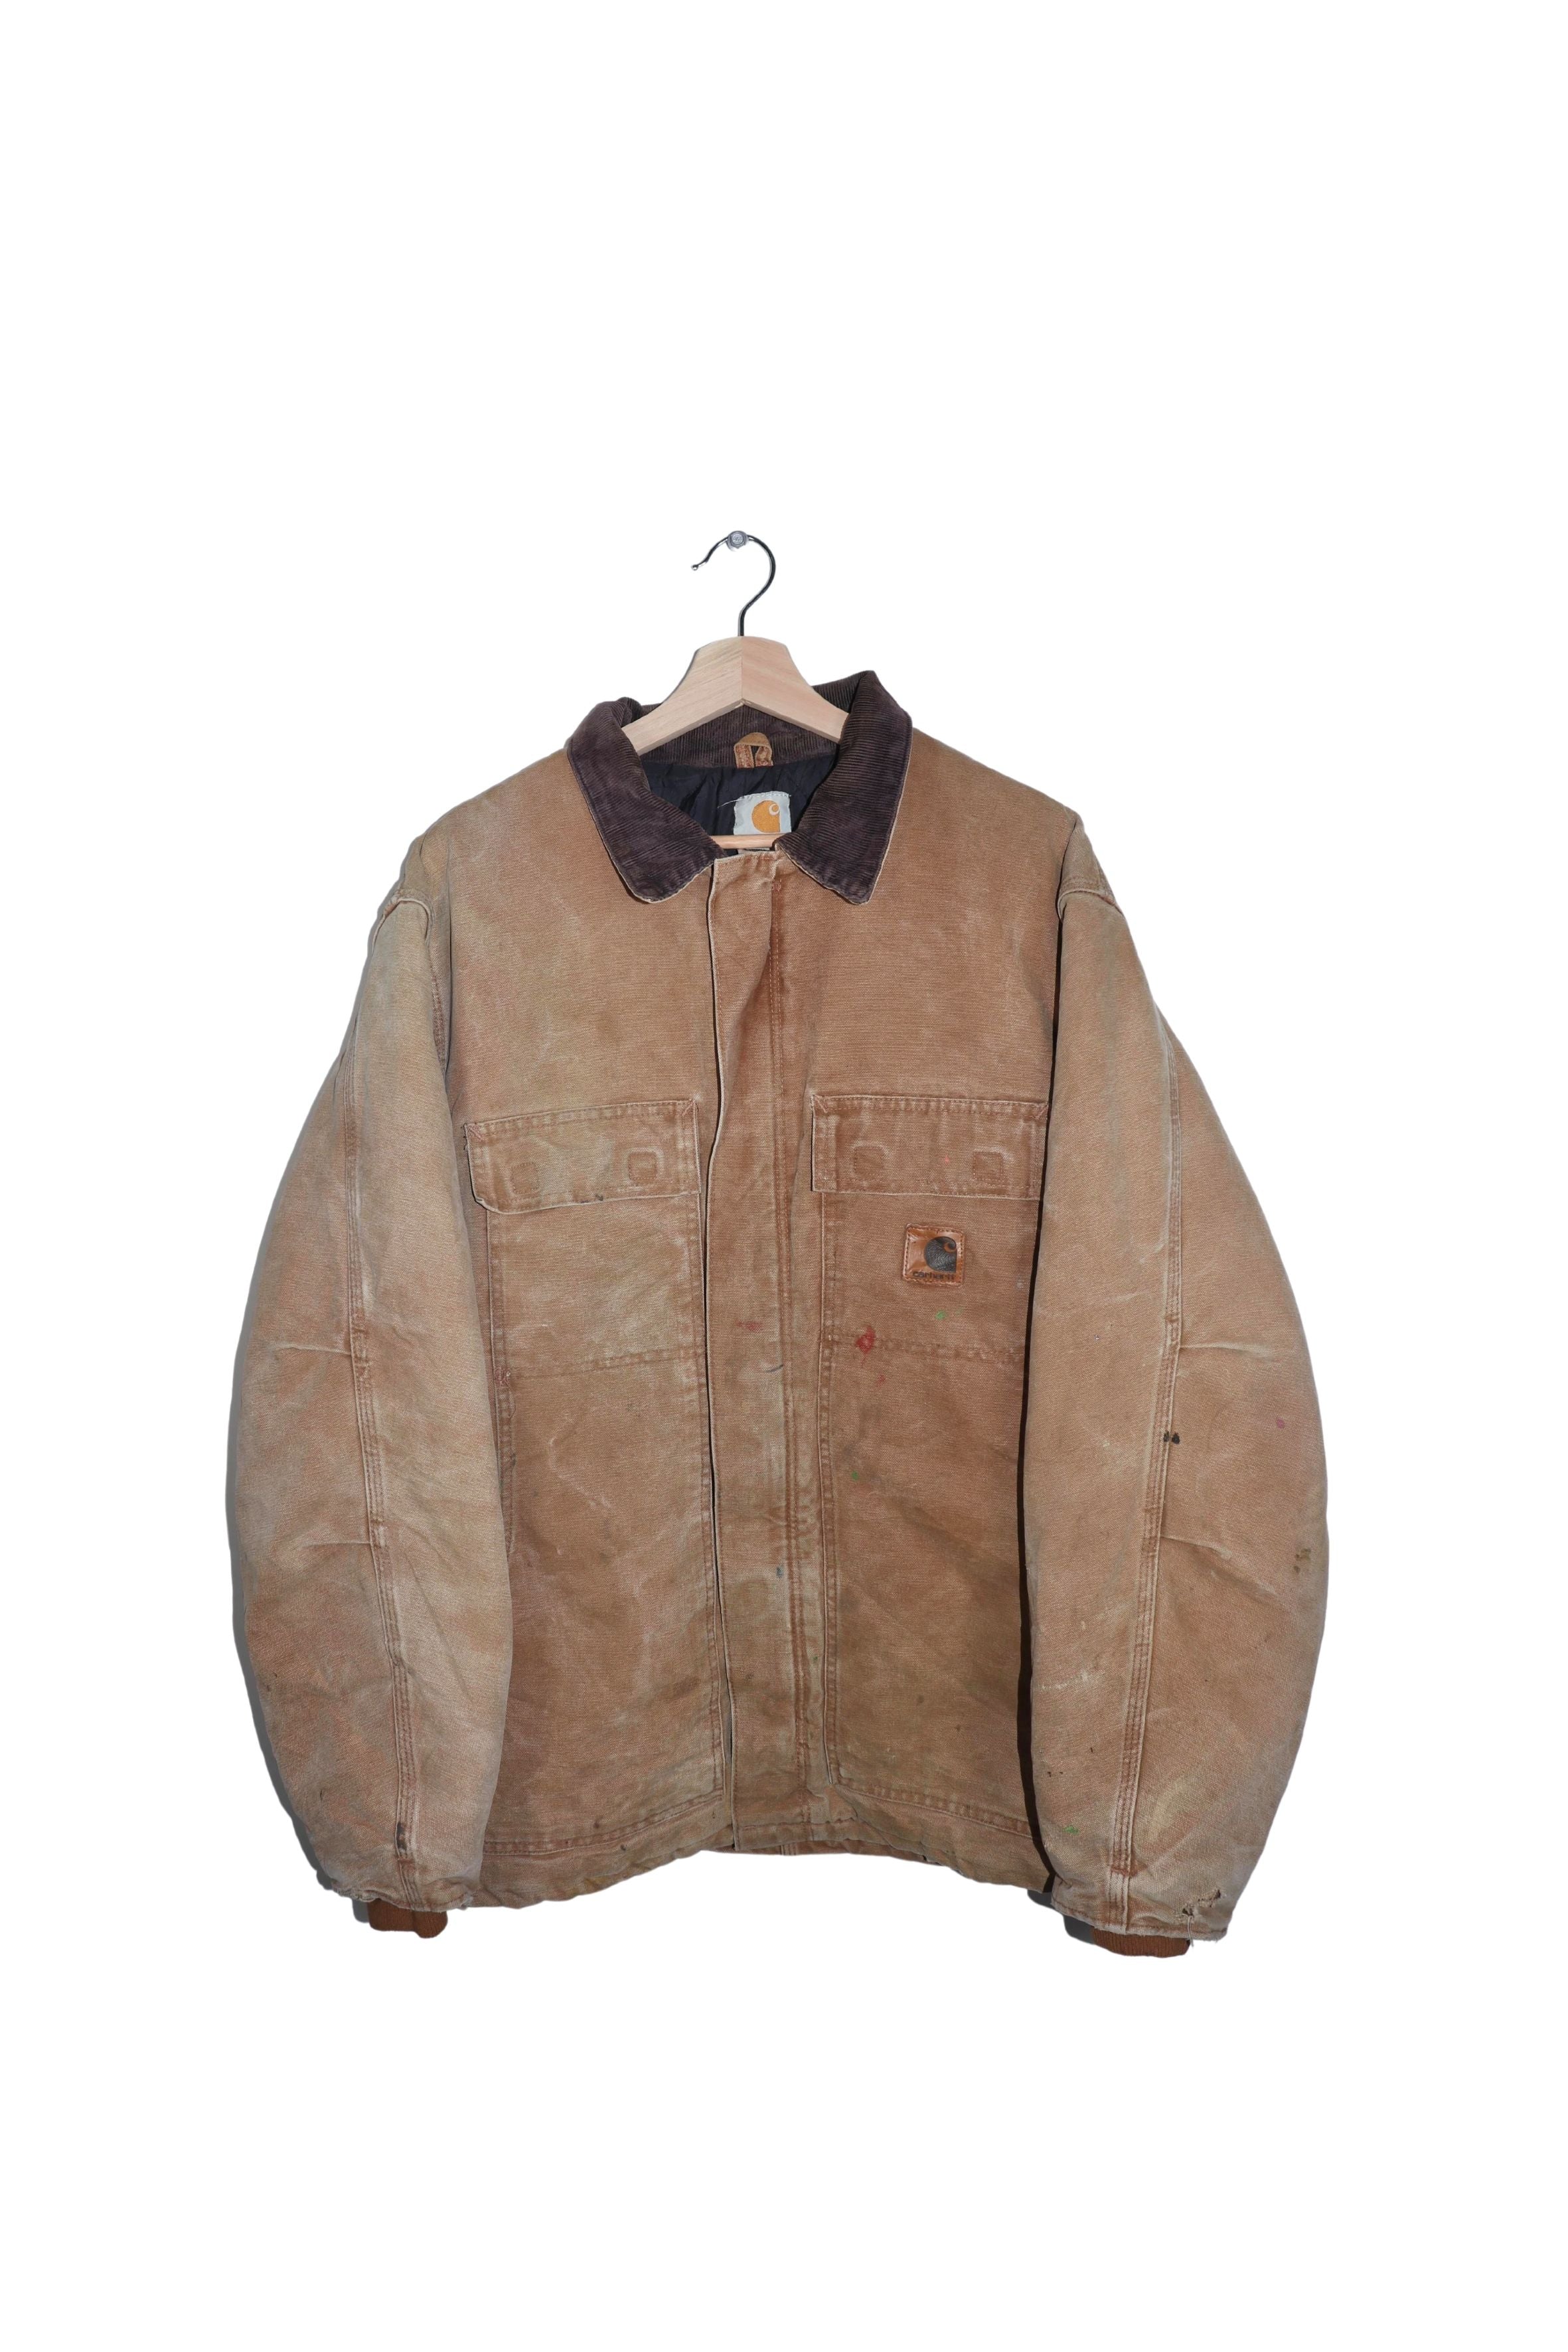 Vintage Carhartt Quilted Corduroy Thick Long Jacket